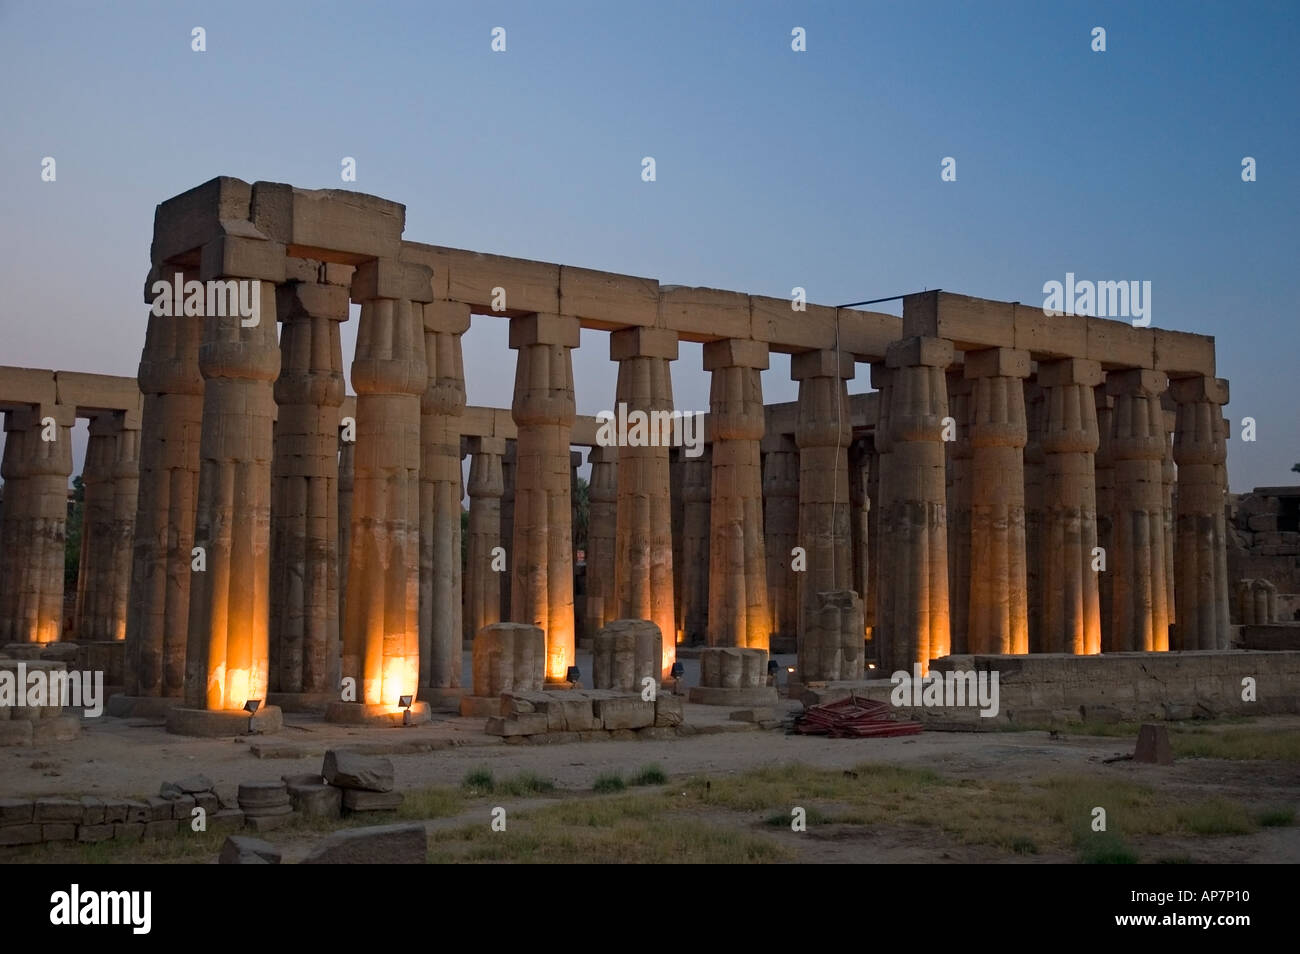 Dramatic lighting at Luxor Temple, Thebes, Upper Egypt, North Africa, Middle East. DSC 4616 Stock Photo